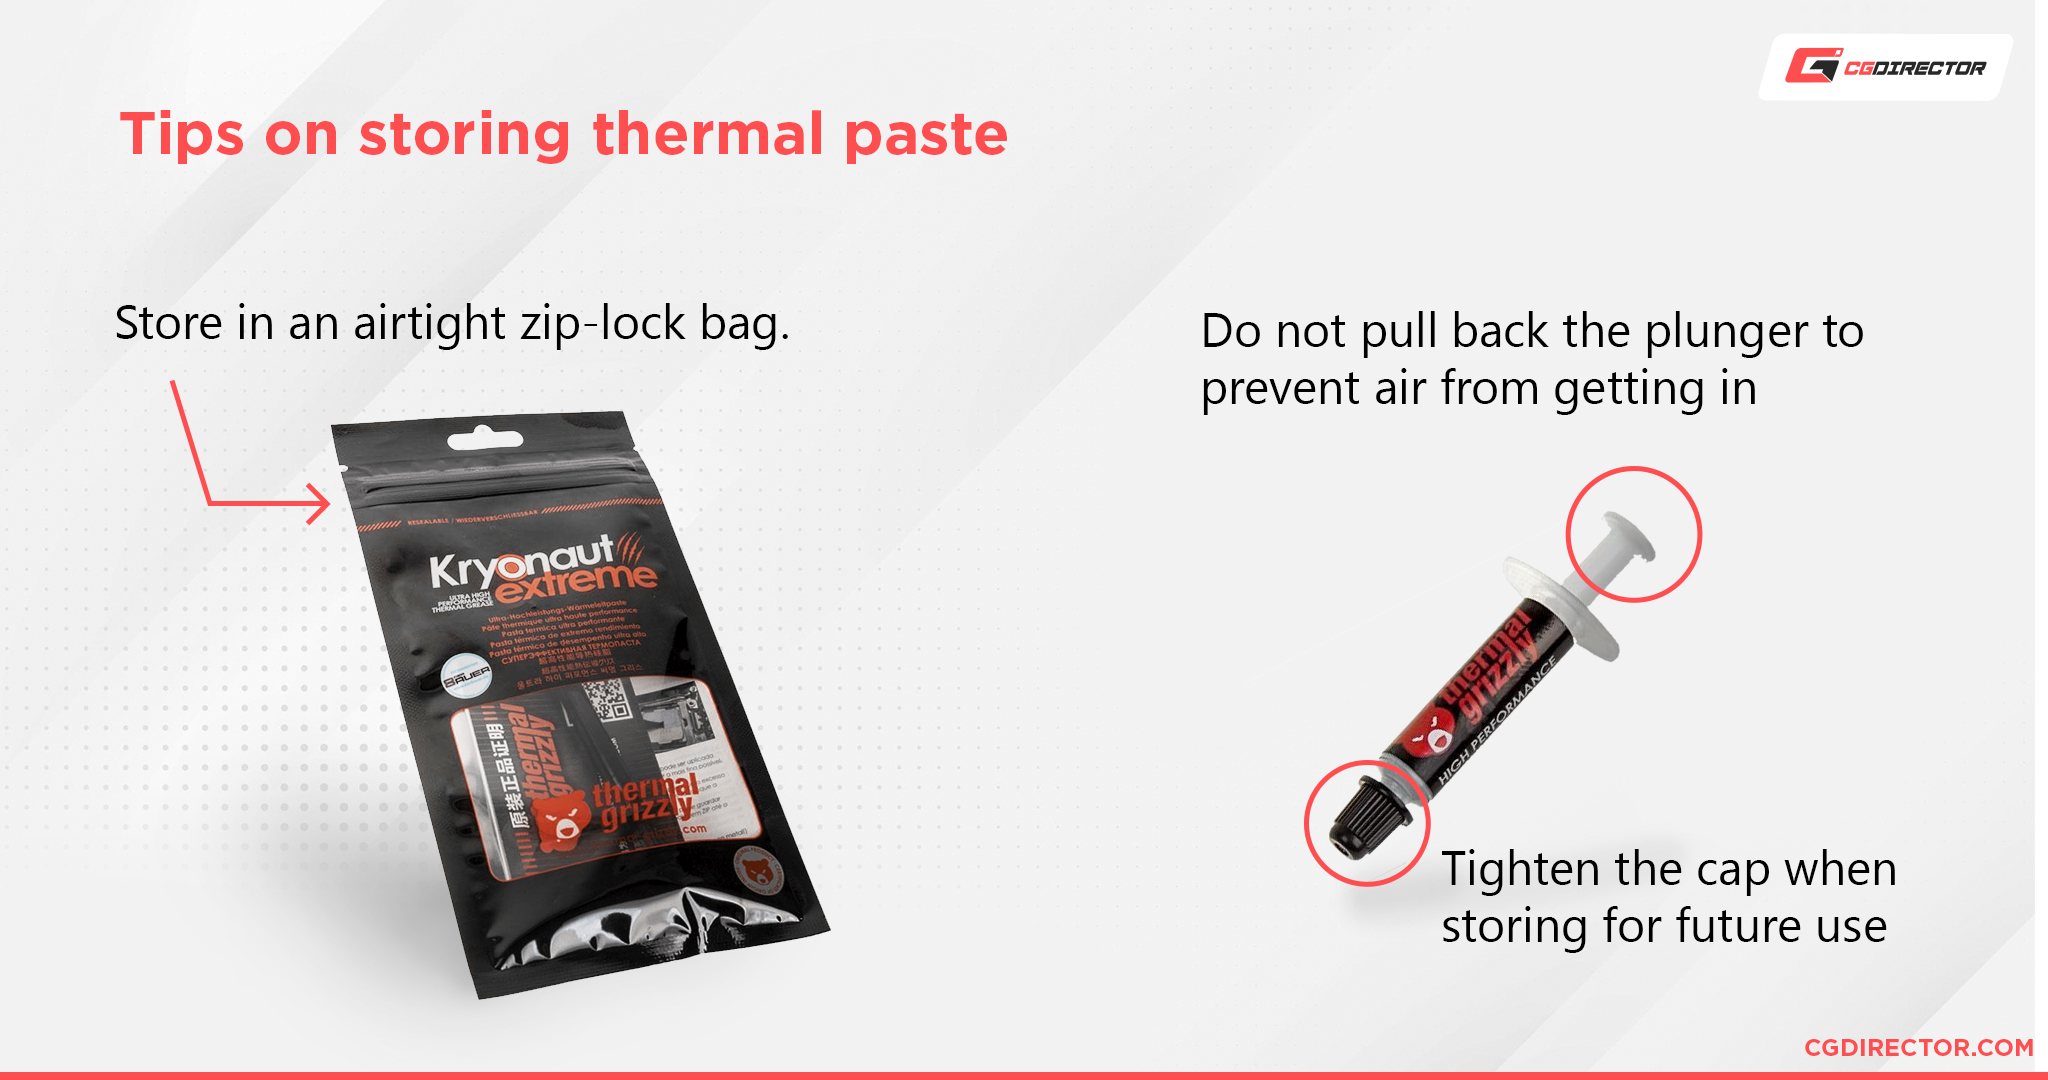 Tips on storing thermal paste